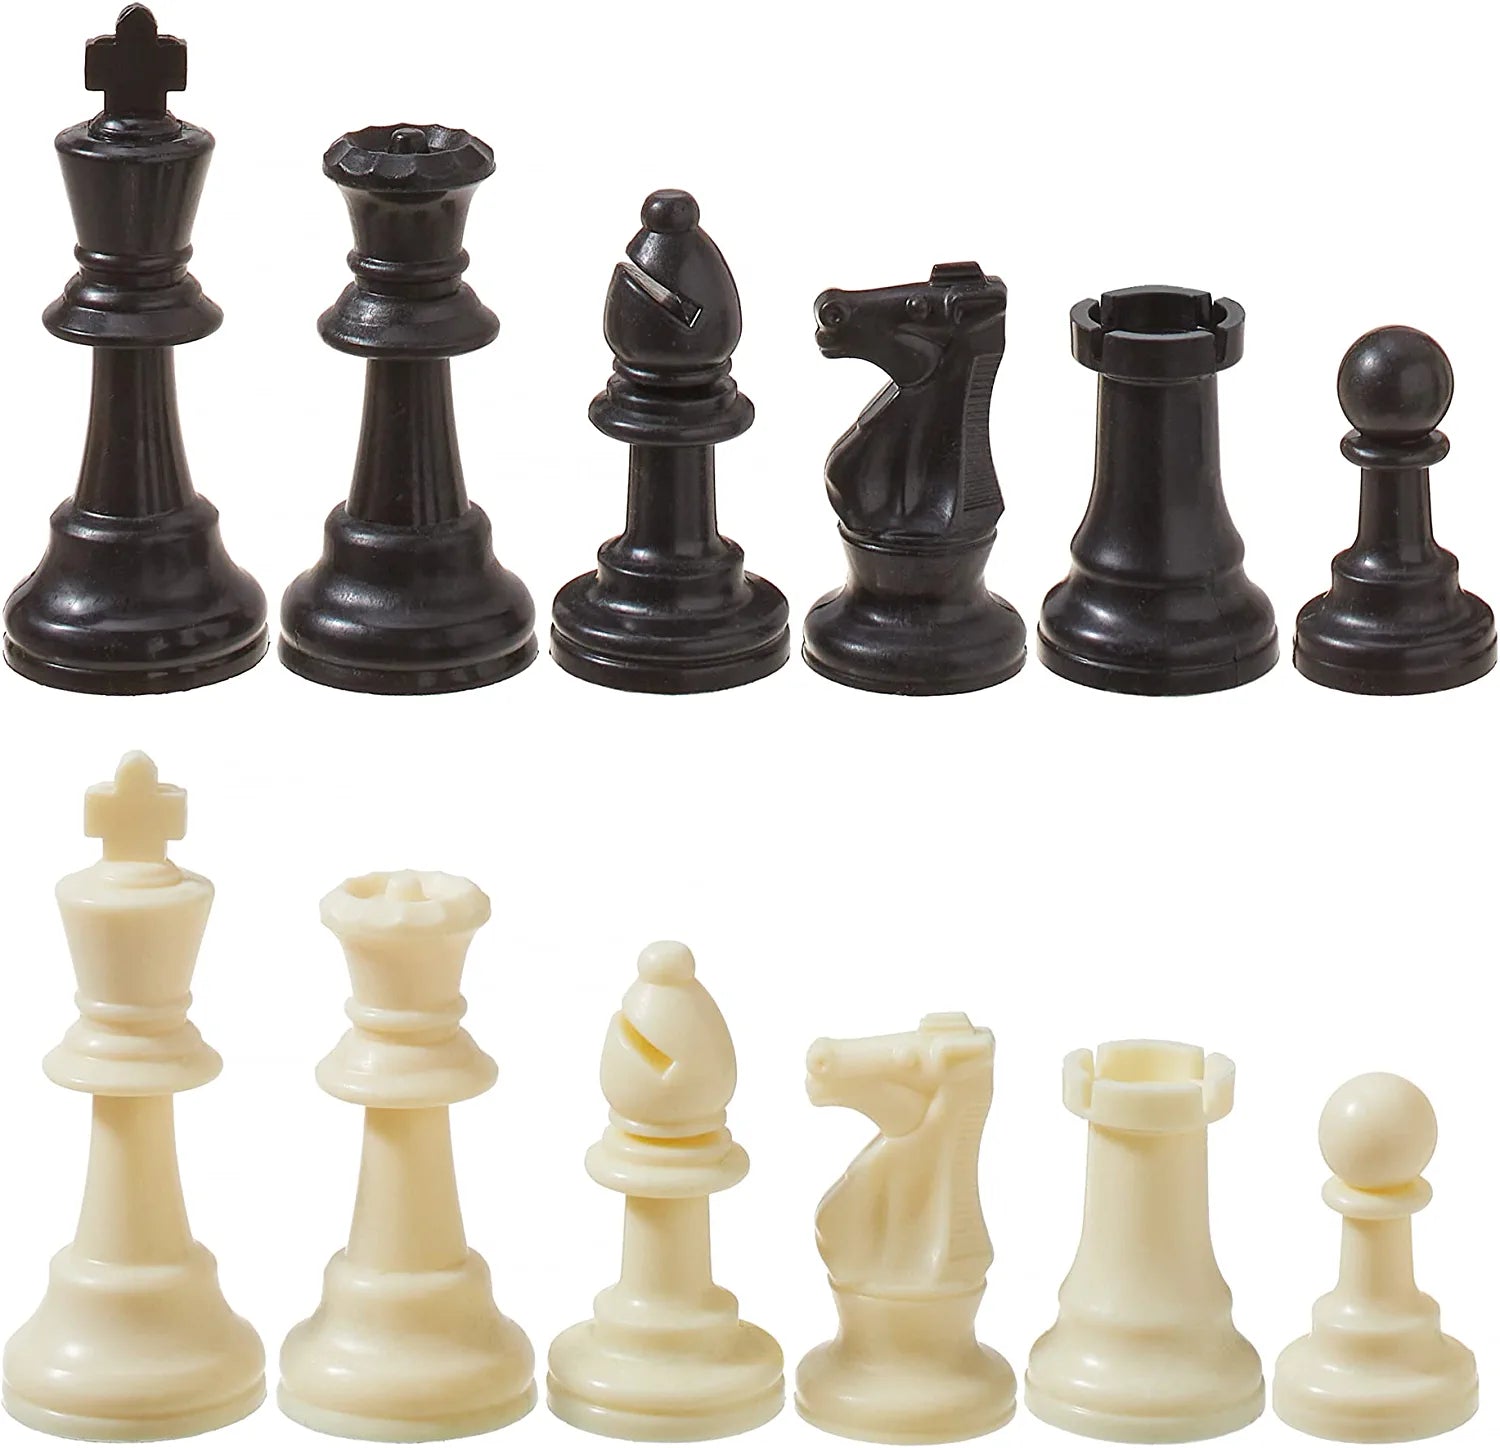 Tournament Chess Pieces (2 options) – Mister Omar Chess Academy